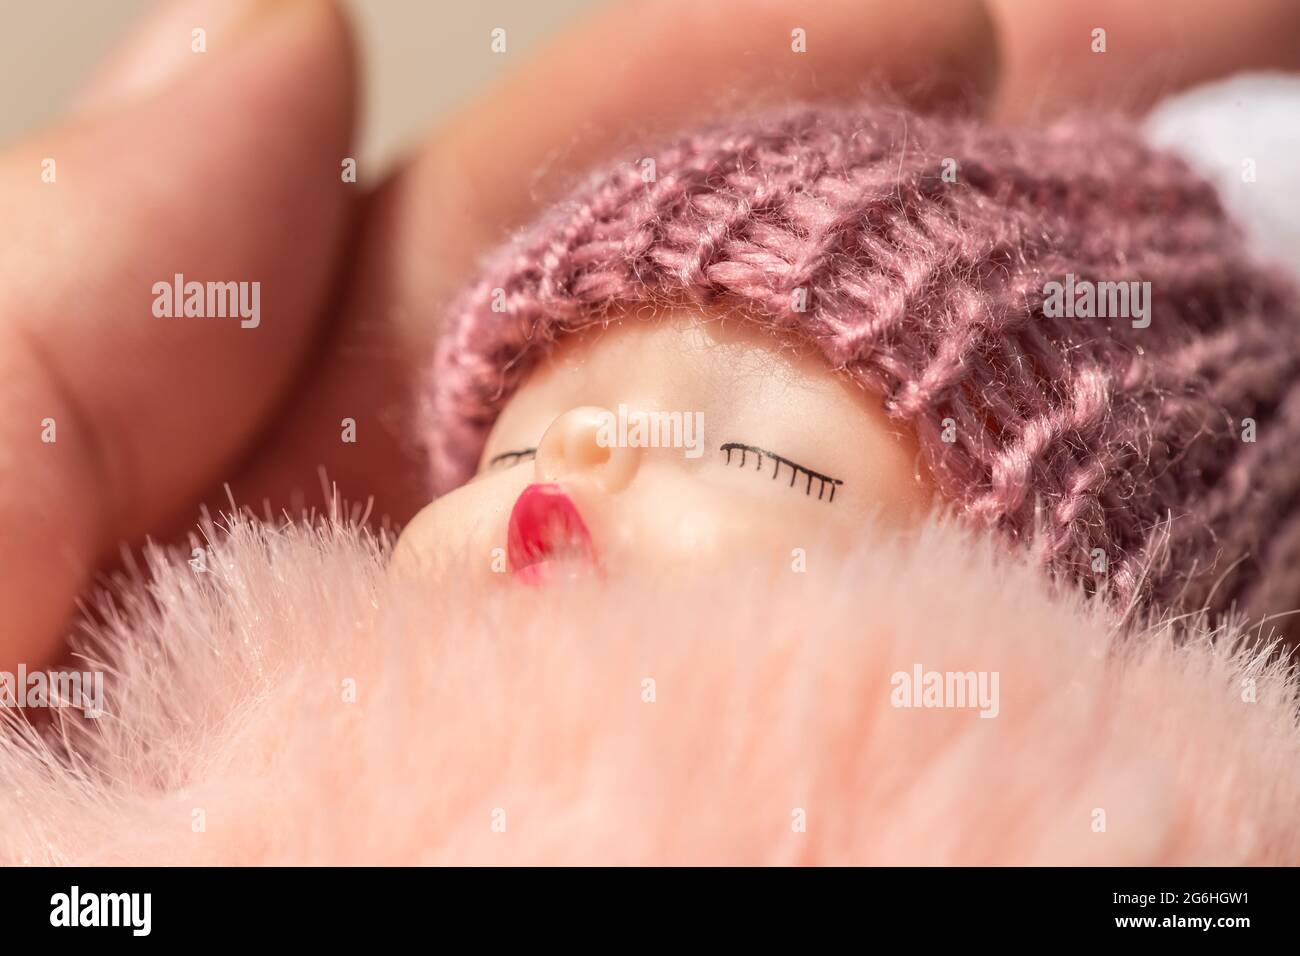 Close-up of a sleeping baby puppet held by a person Stock Photo